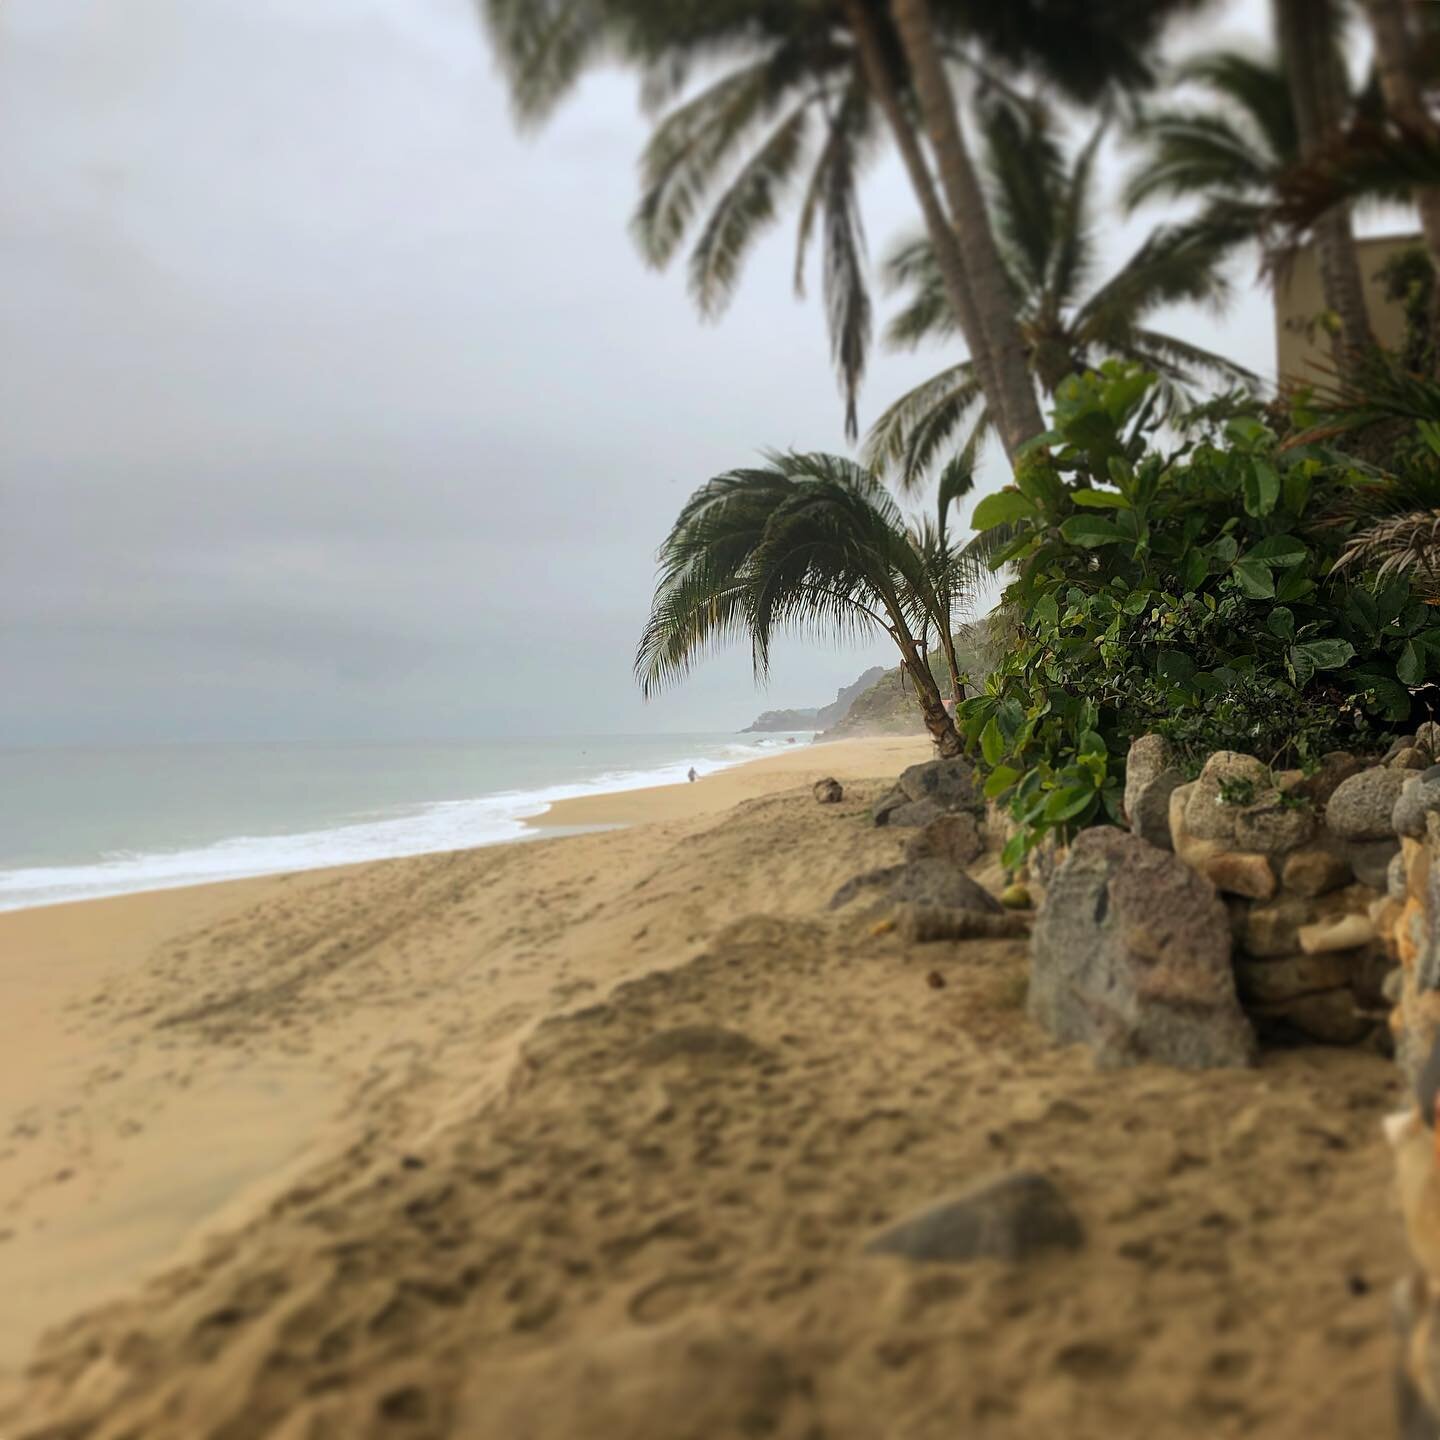 Finding our beach.
#sayulita
#mexico 
#vacationmode